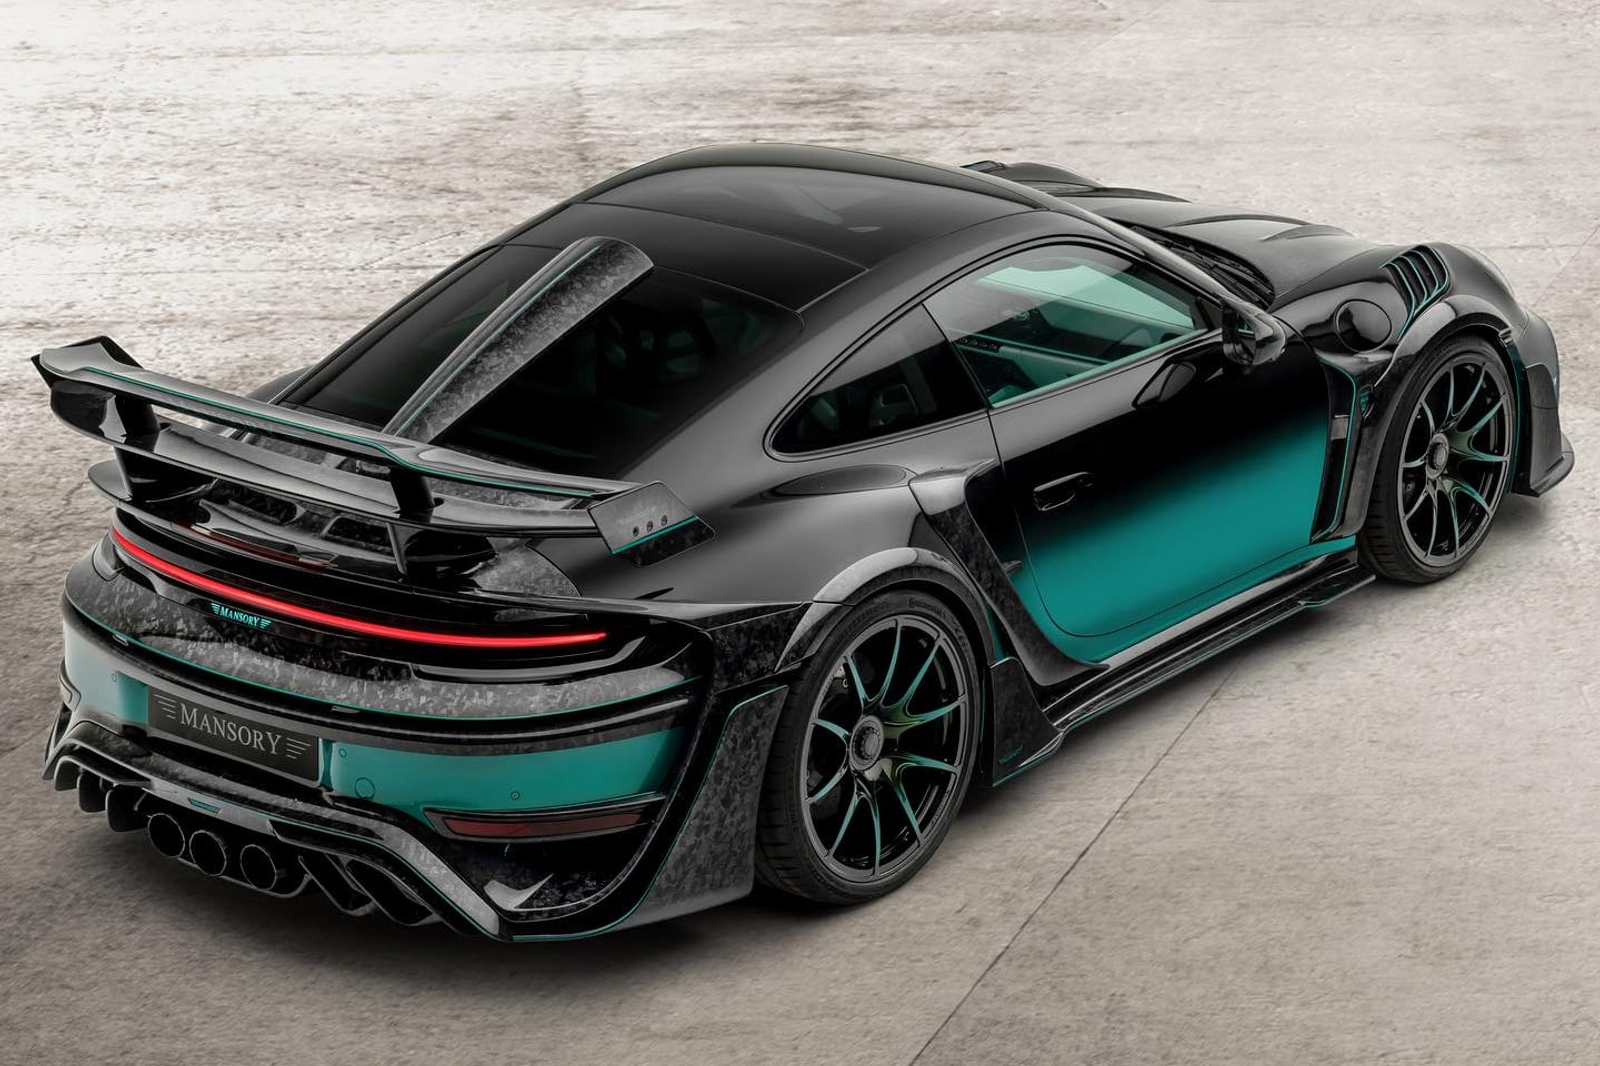 tuning, sports cars, not even 888 hp can save this mansory porsche 911 turbo s